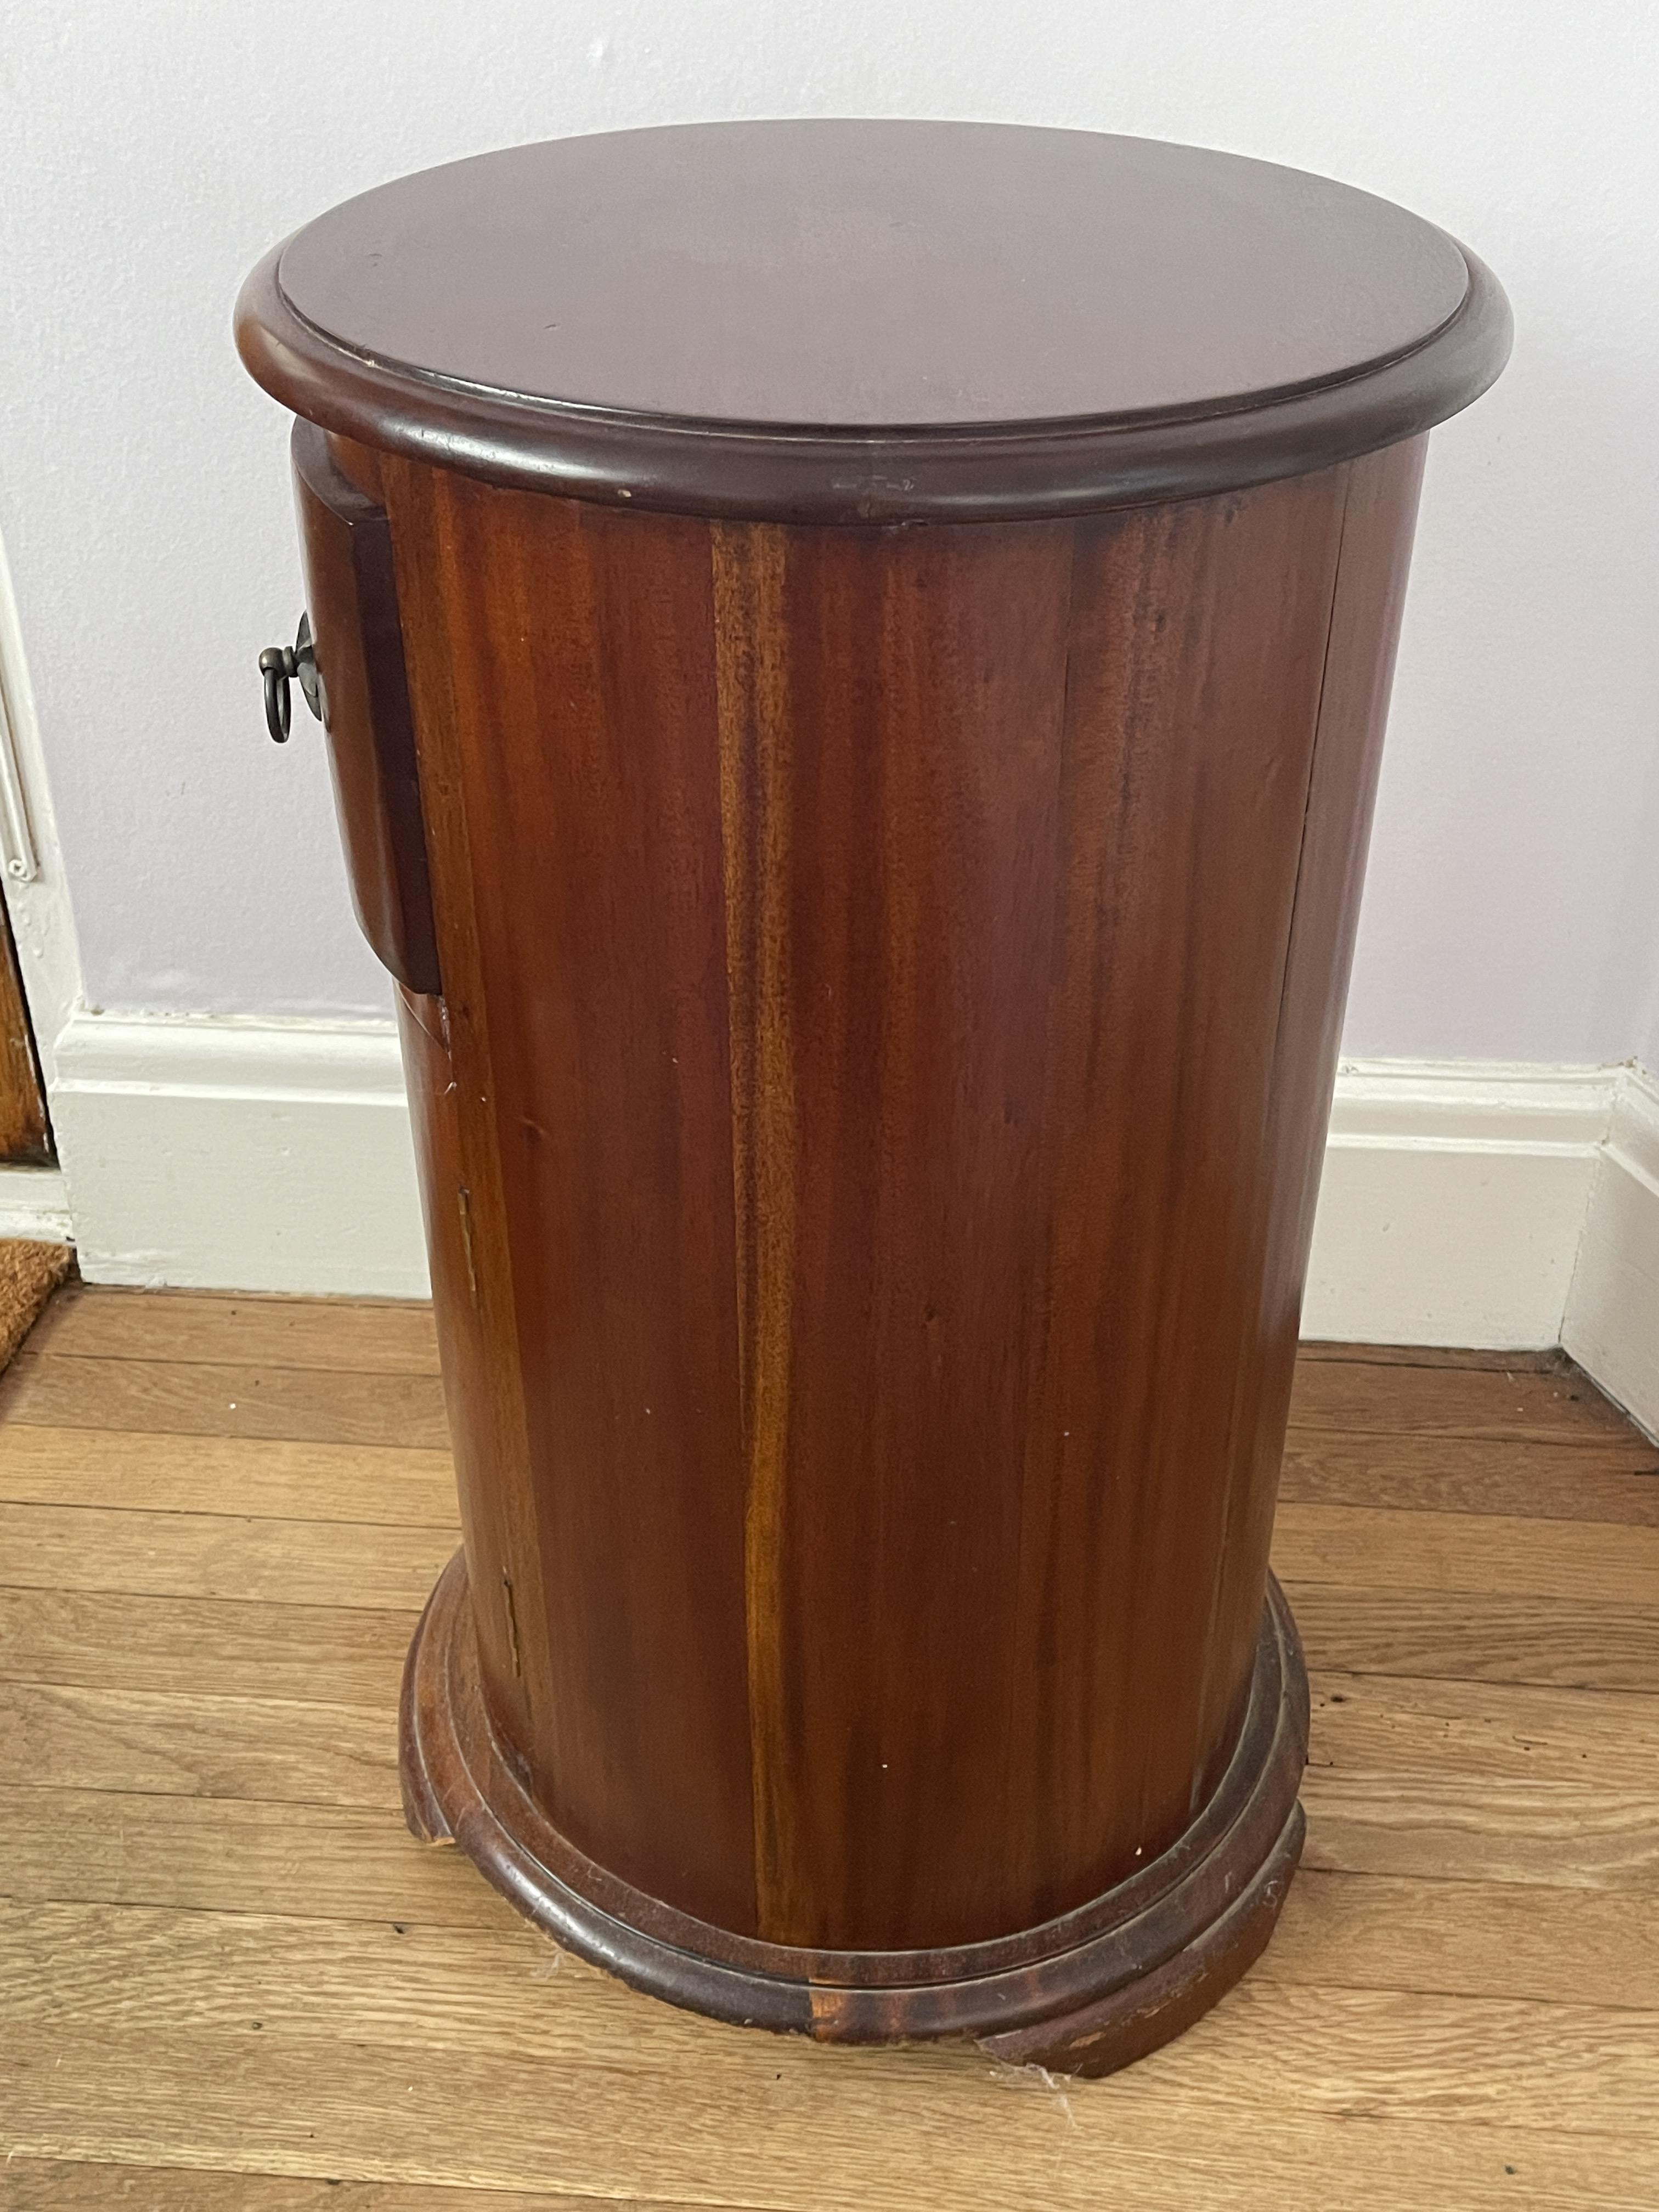 Mahogany Round Drum Chest with Drawer and Cupboard - Image 9 of 14